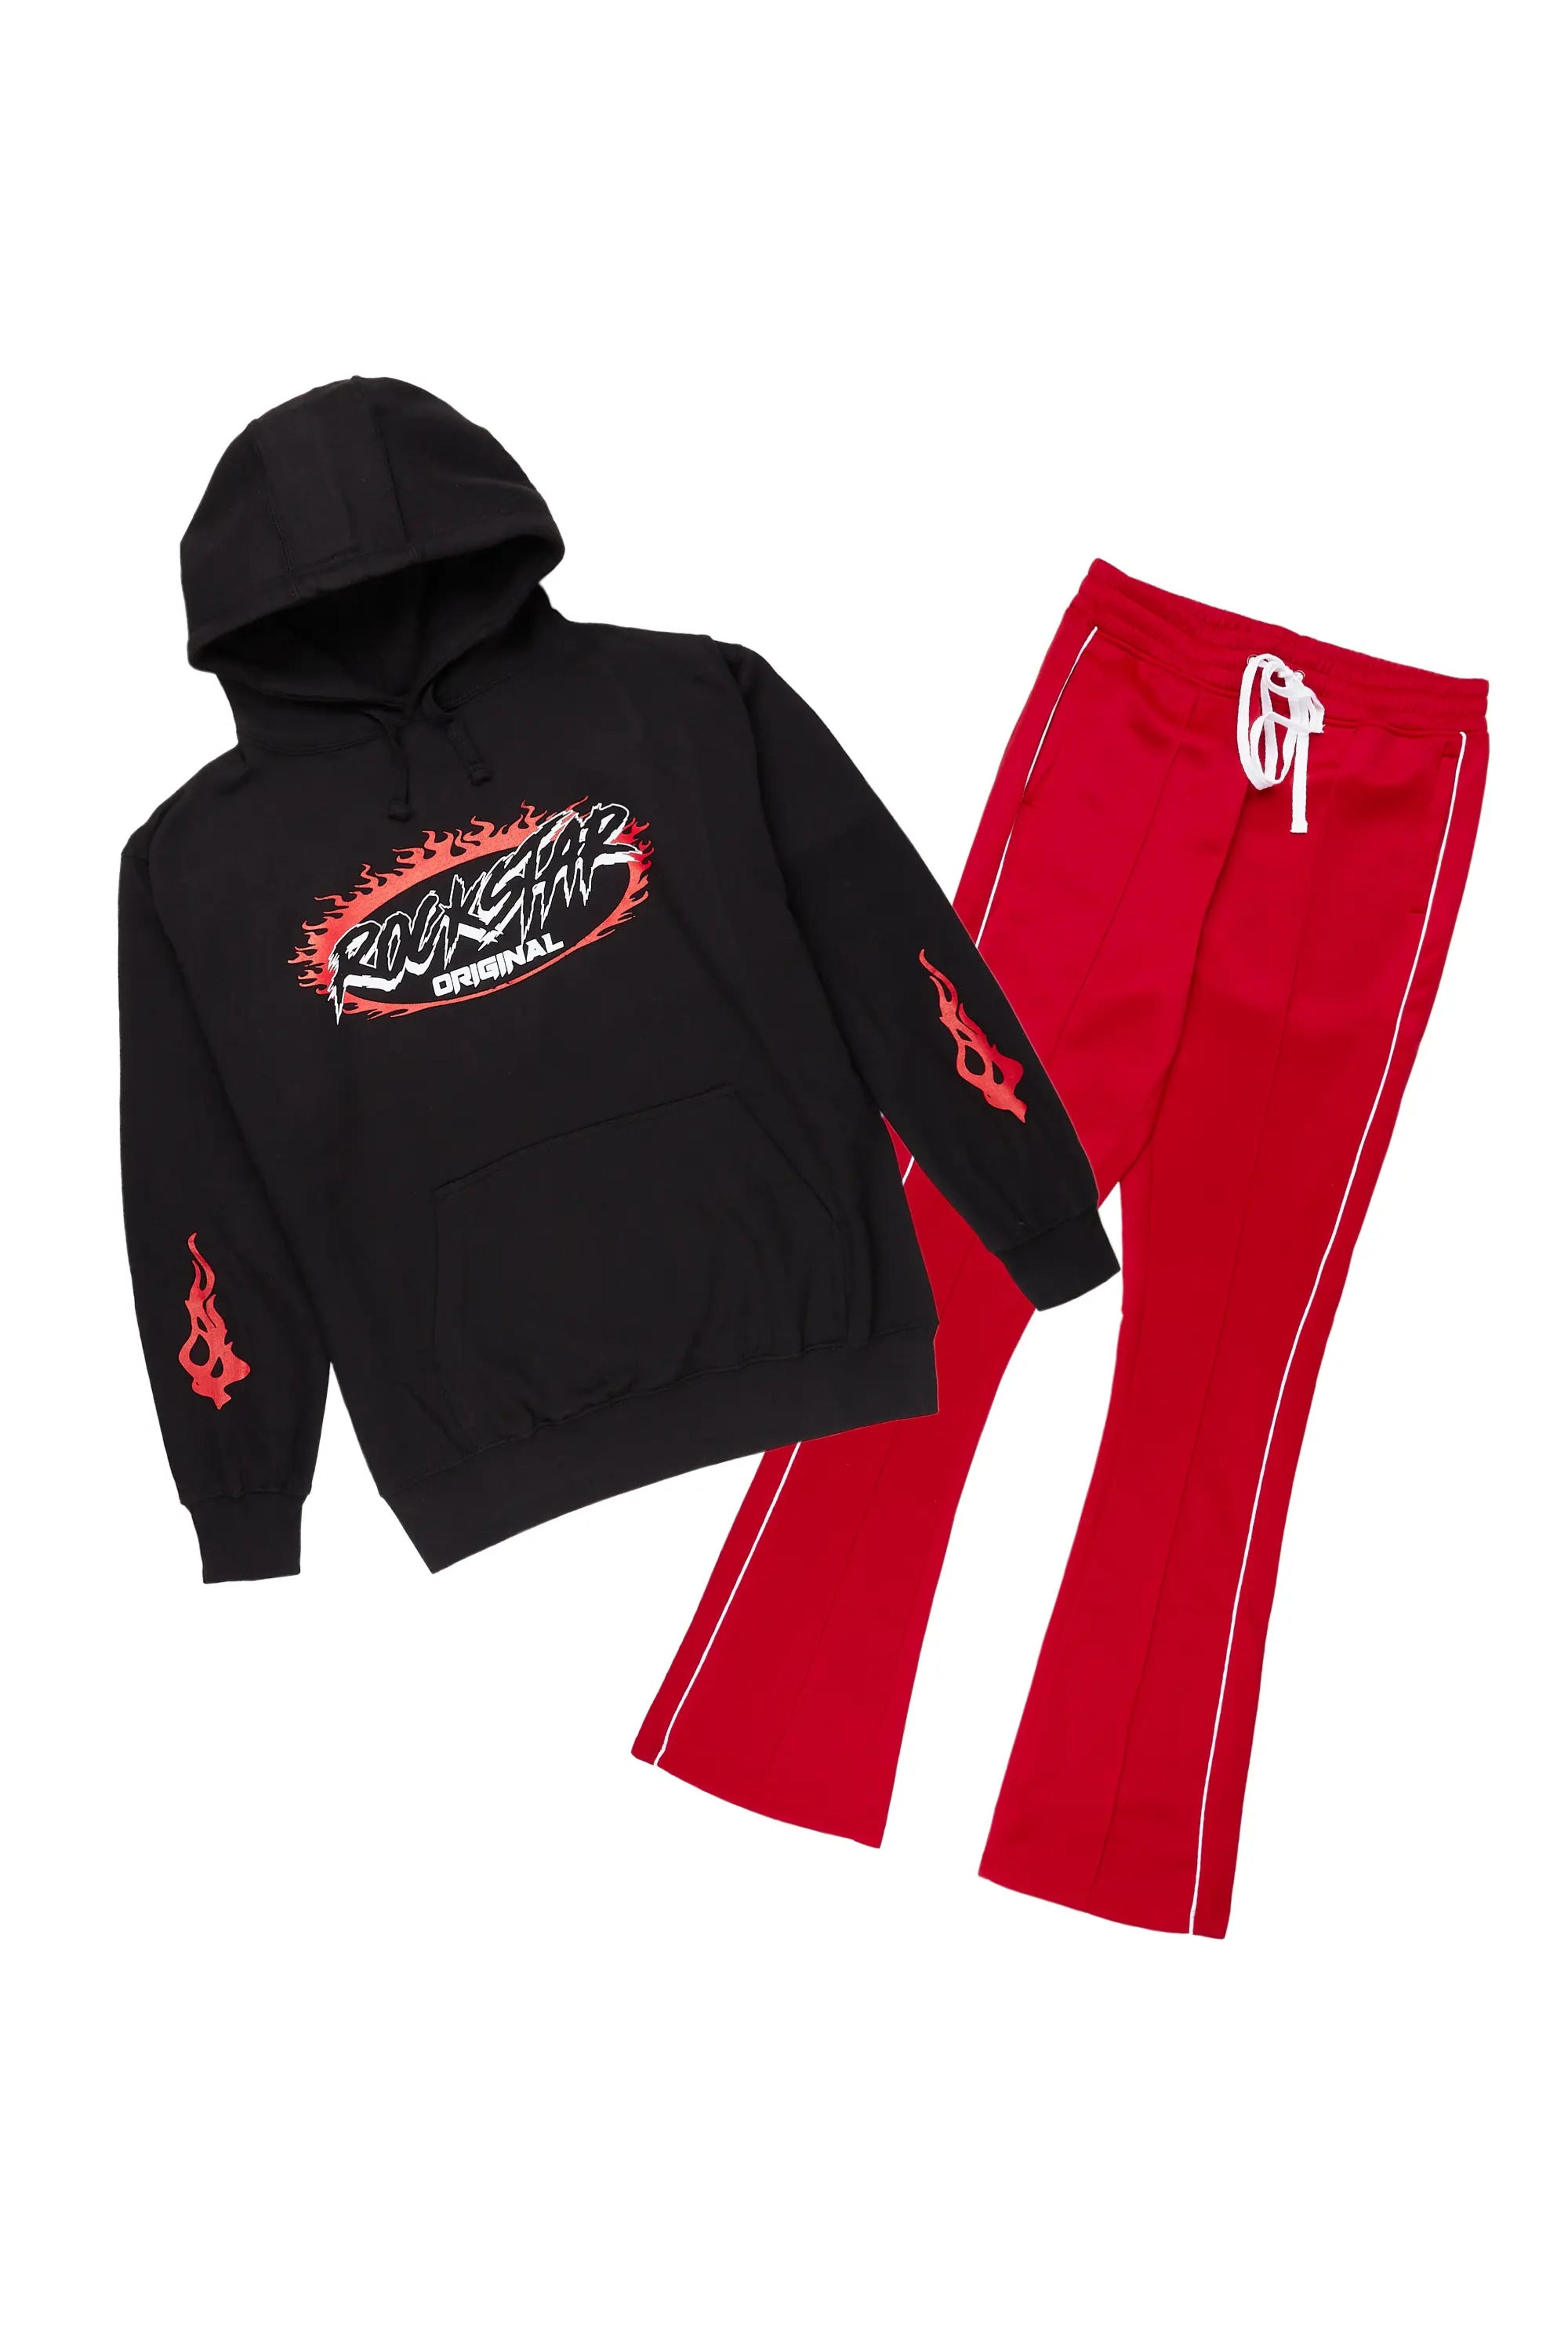 Alternate View 1 of Draven Black/Red Graphic Hoodie Track Set